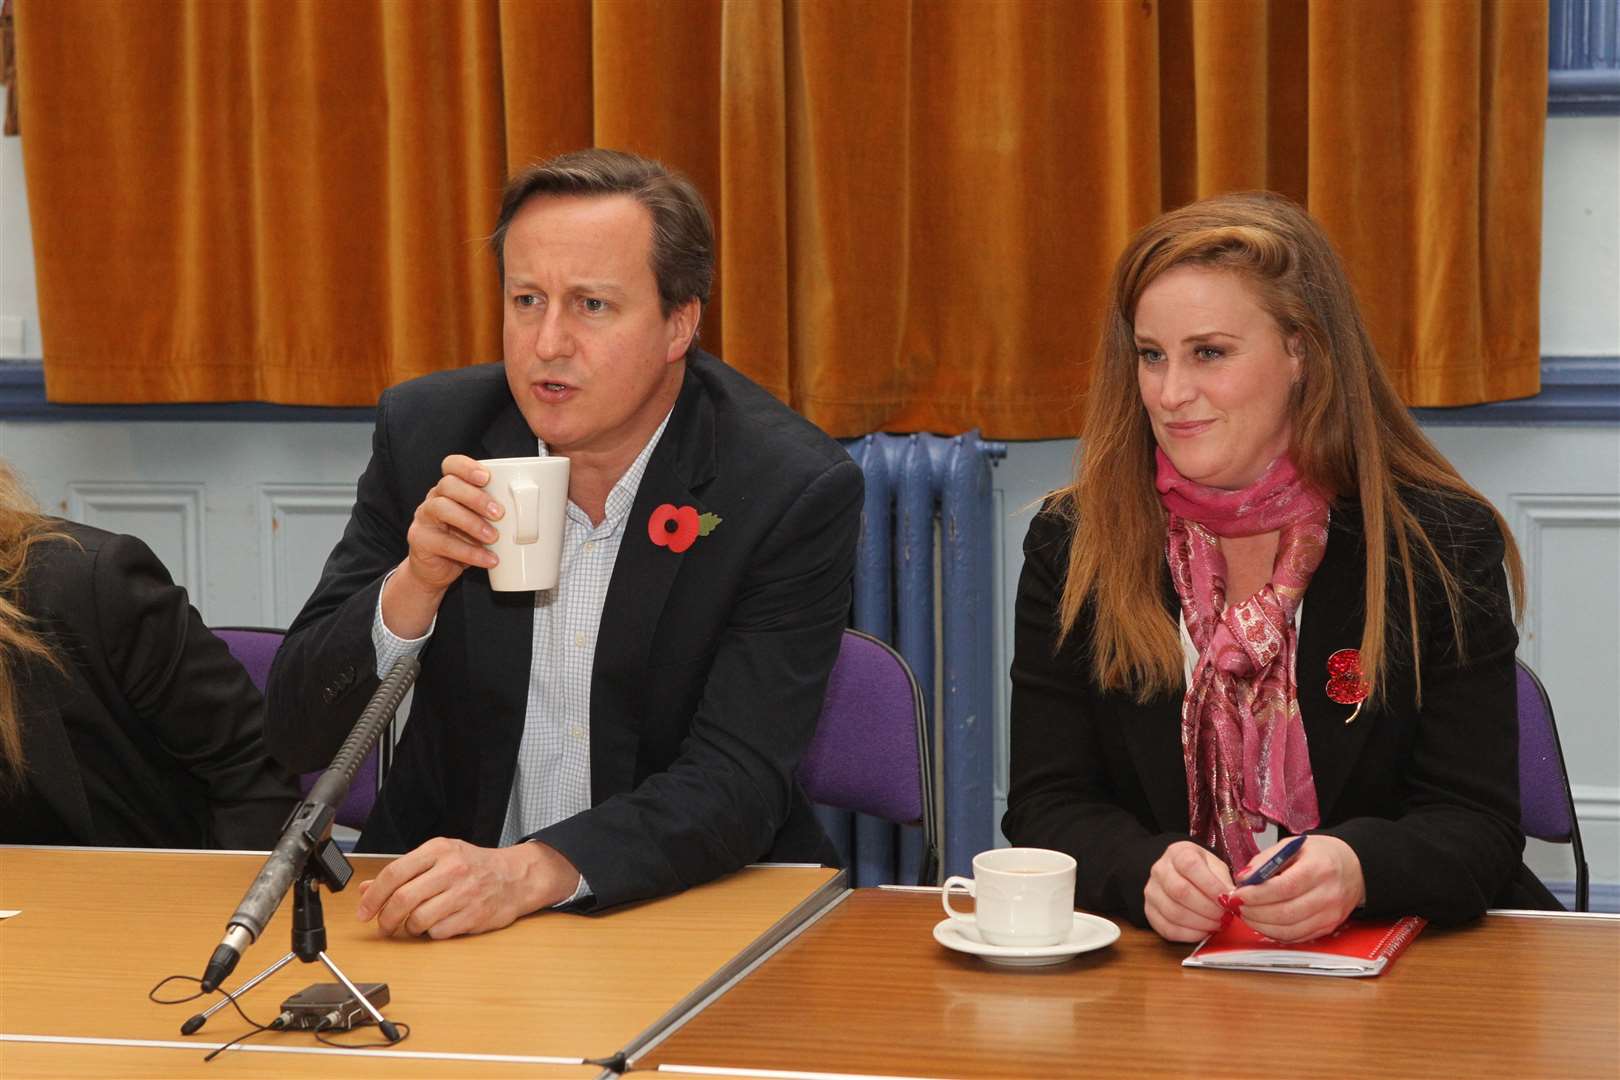 David Cameron at the Brook theatre in Chatham with Kelly Tolhurst